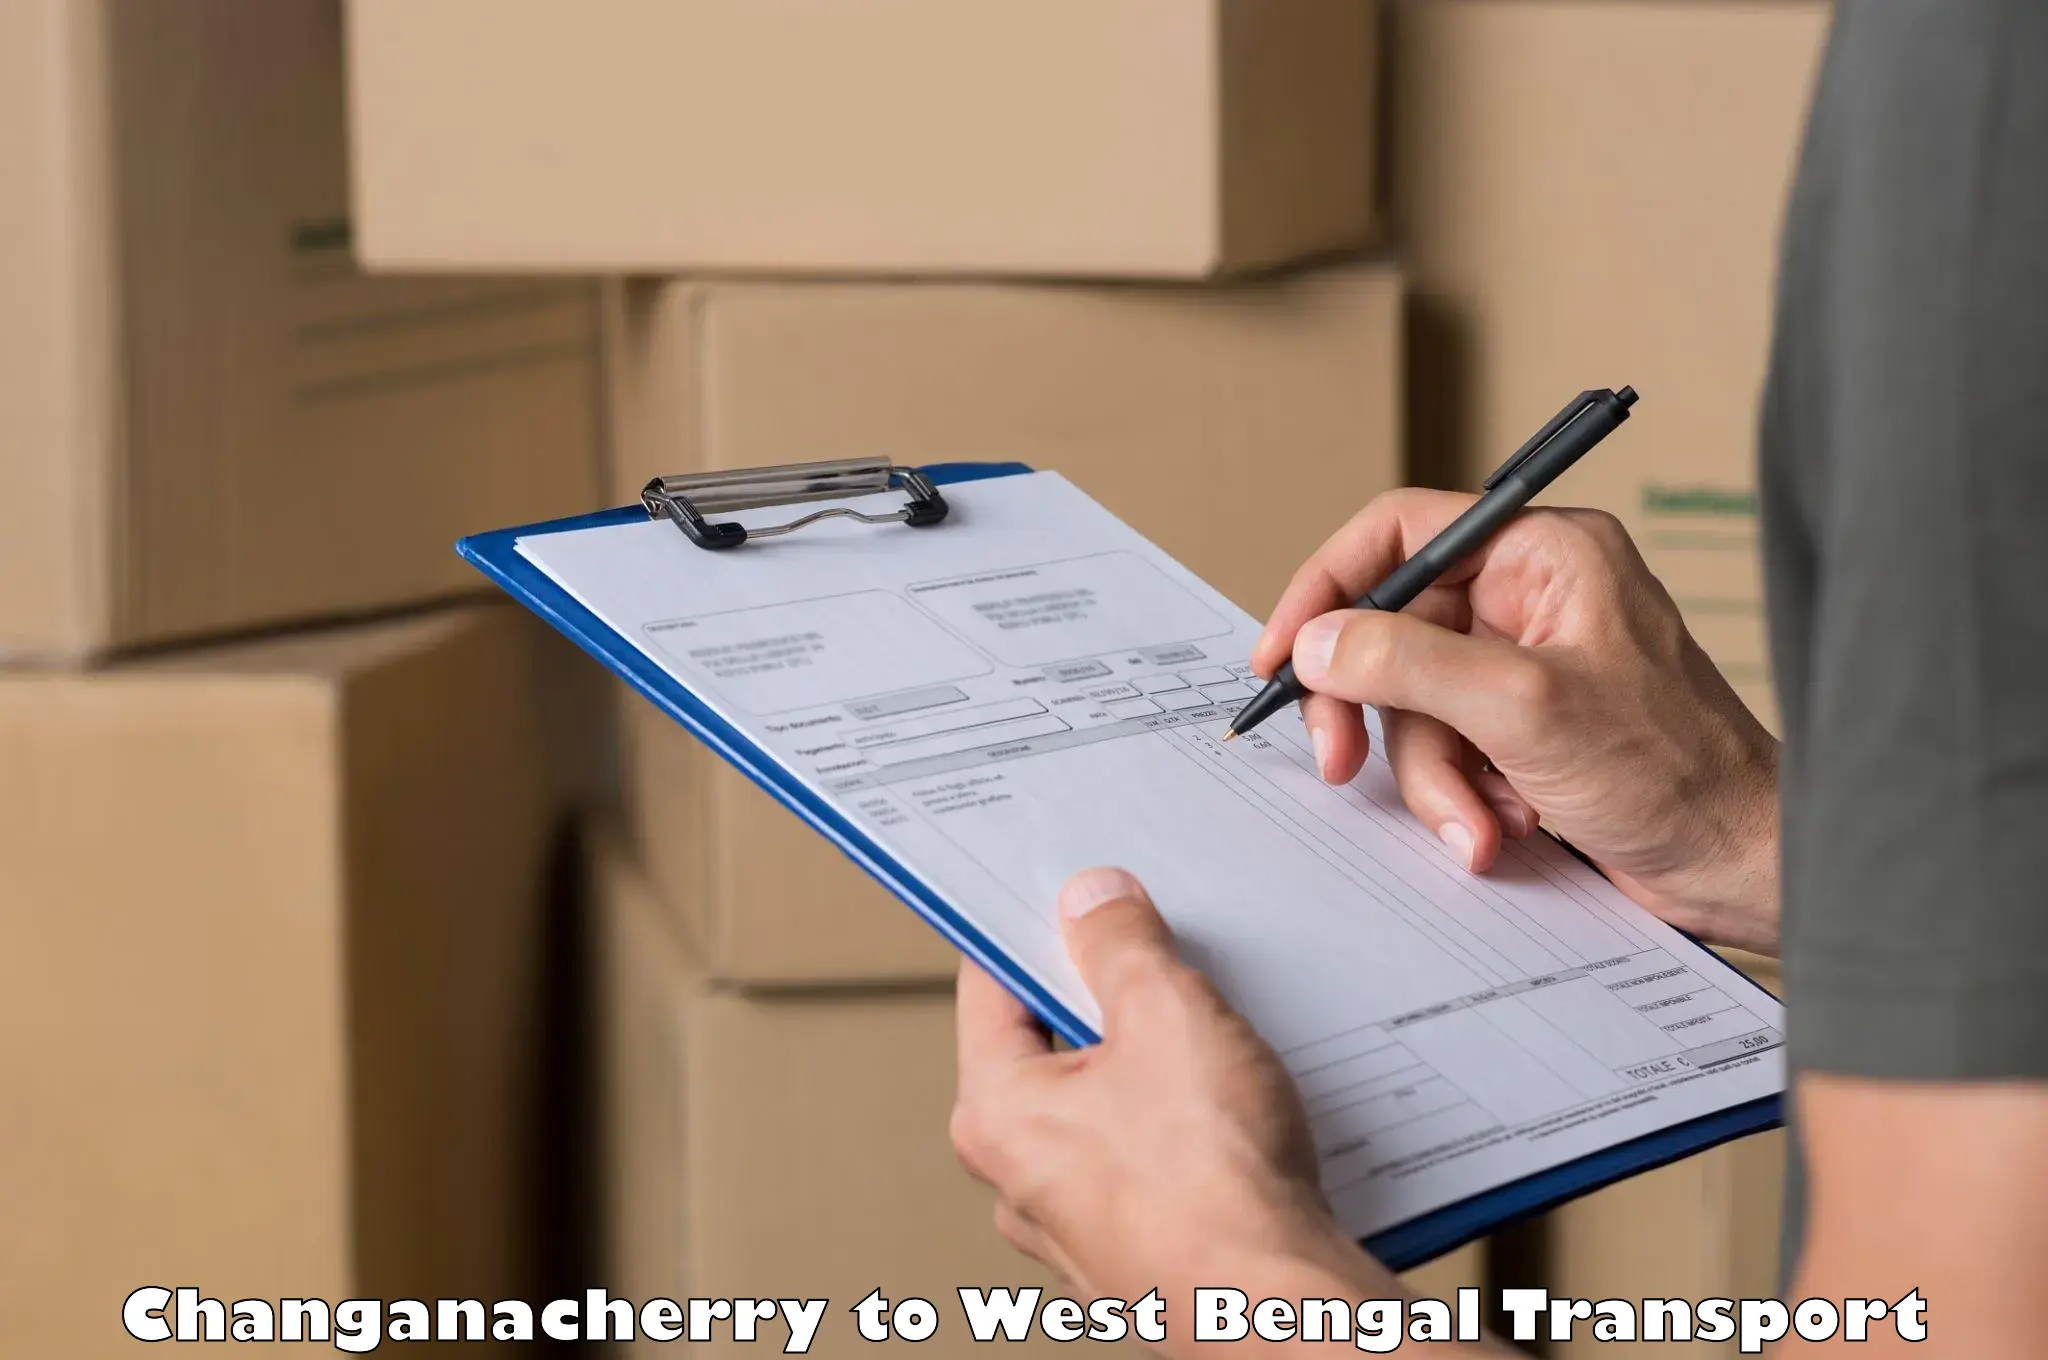 Truck transport companies in India Changanacherry to Domkal